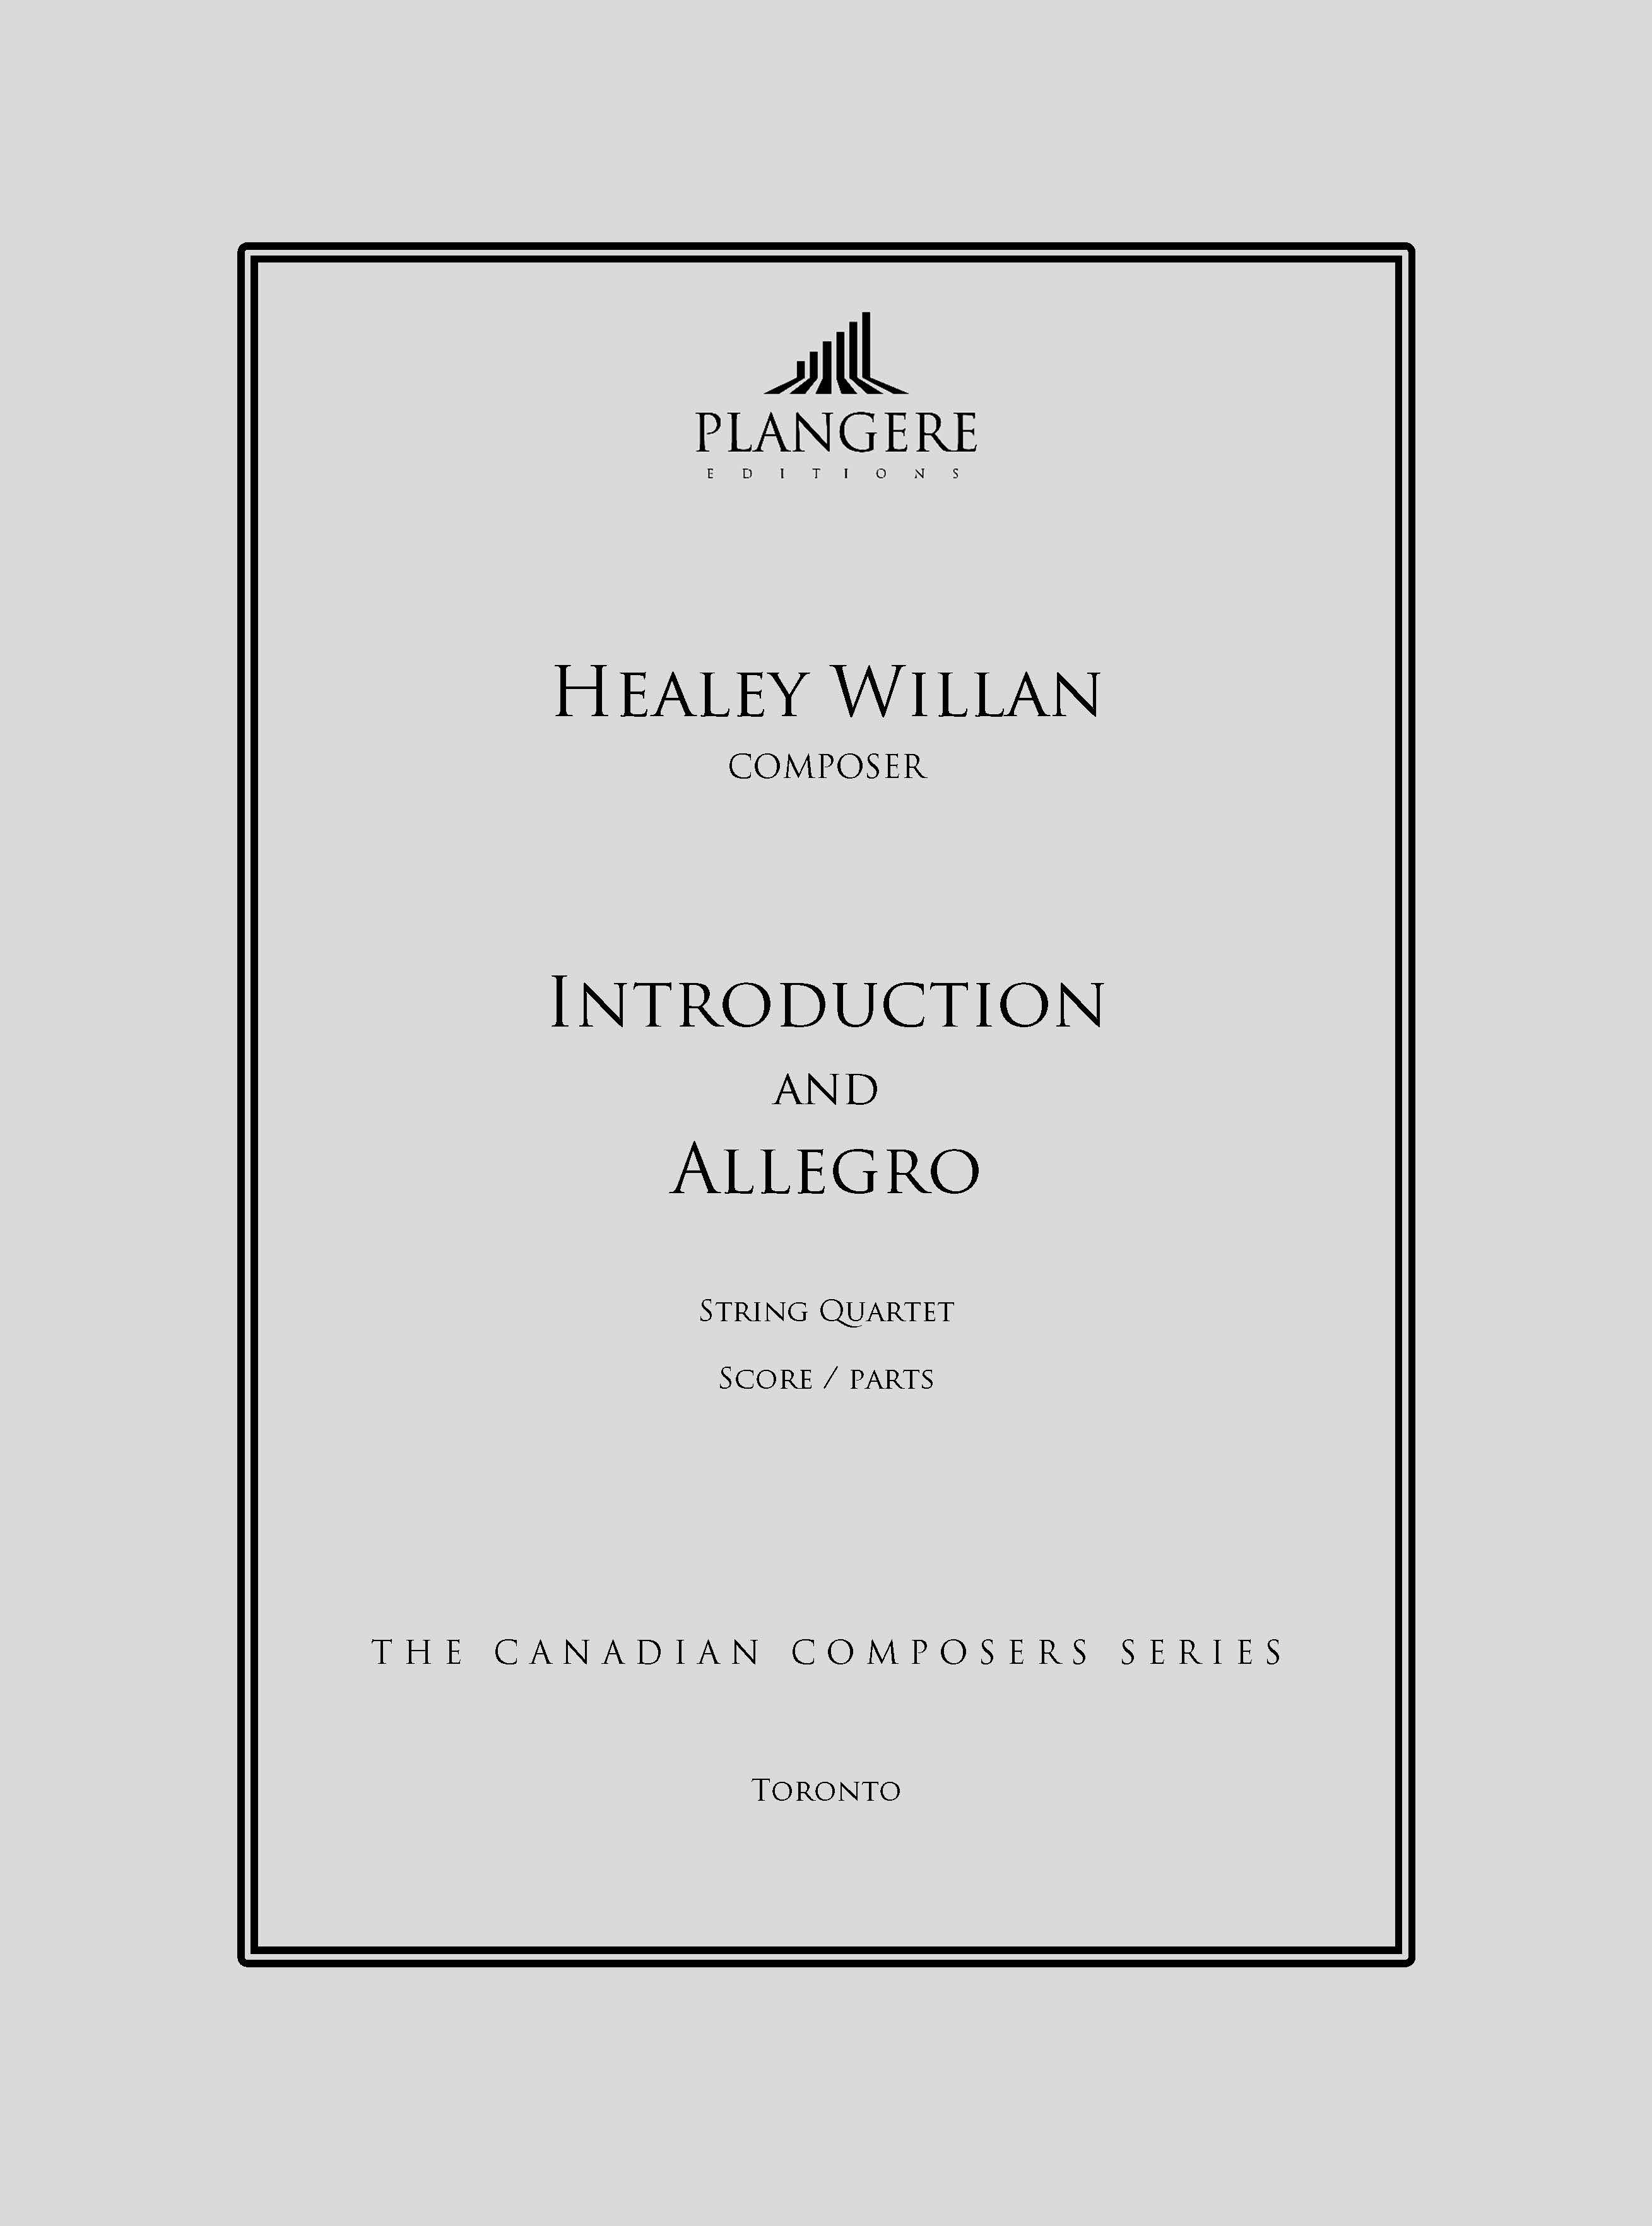 Introduction and Allegro for String Quartet